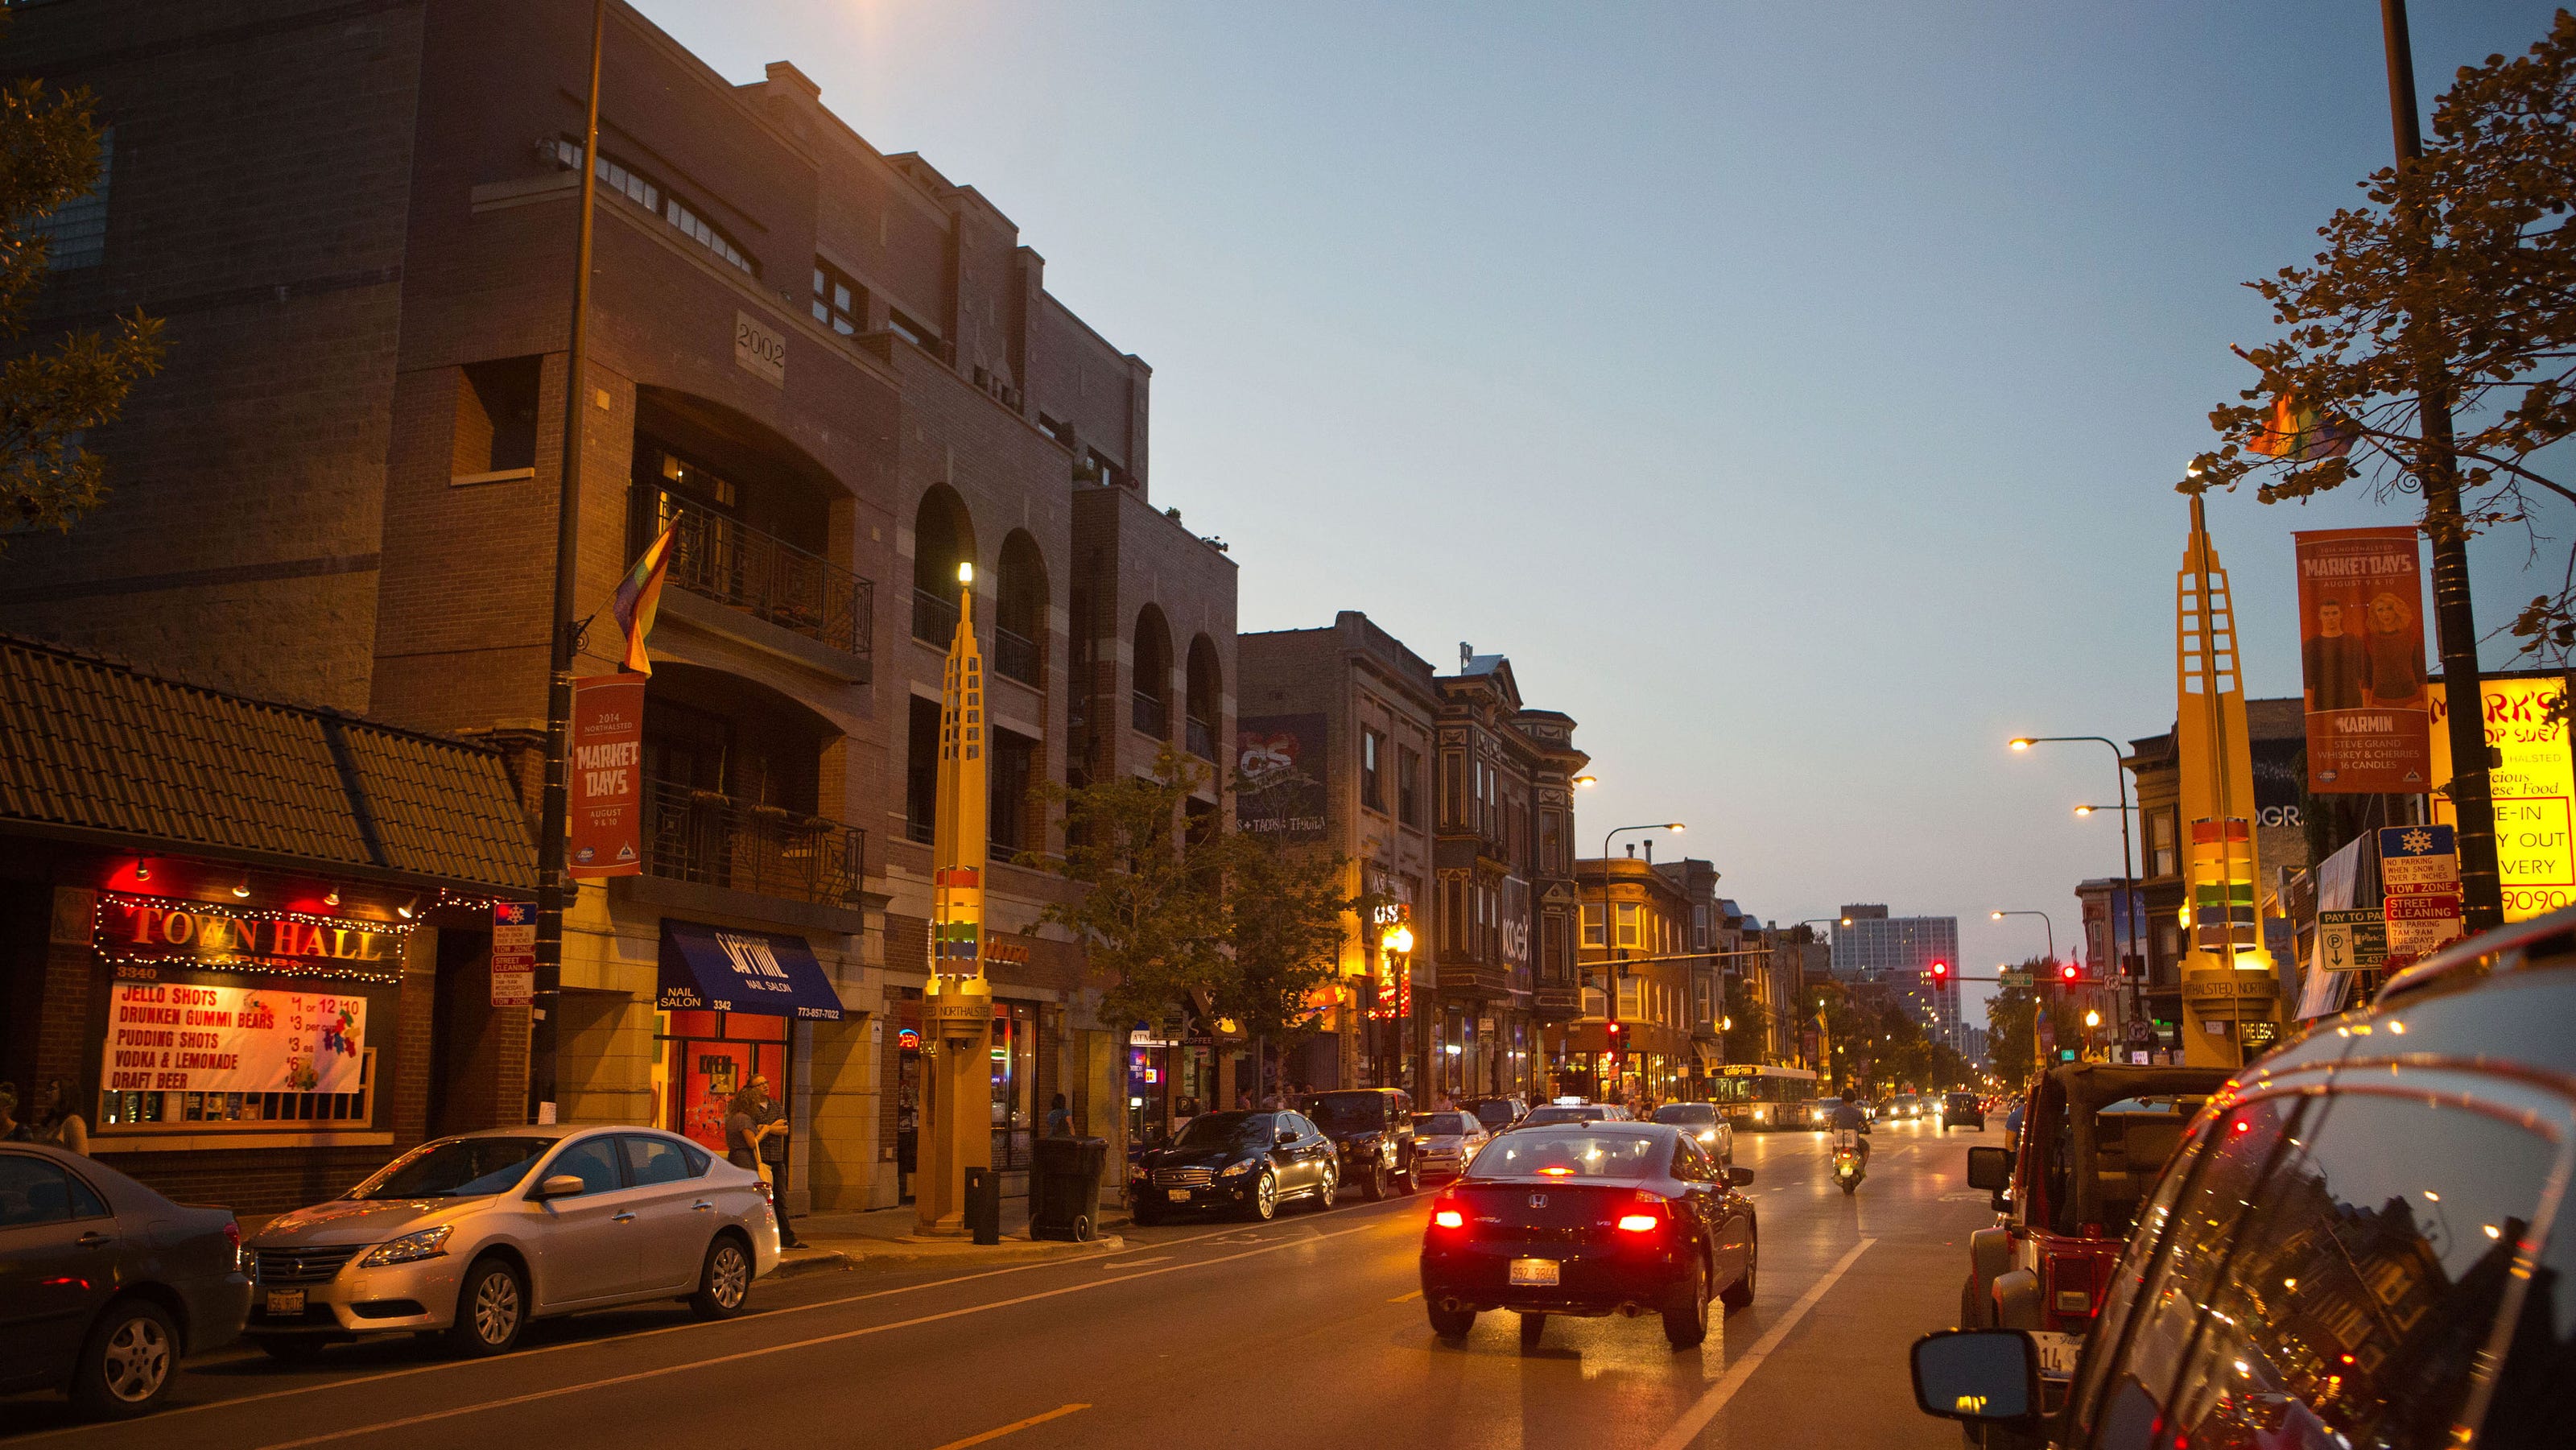 Boystown In Chicago : What to Do in Boystown Chicago - Go Visit Chicago